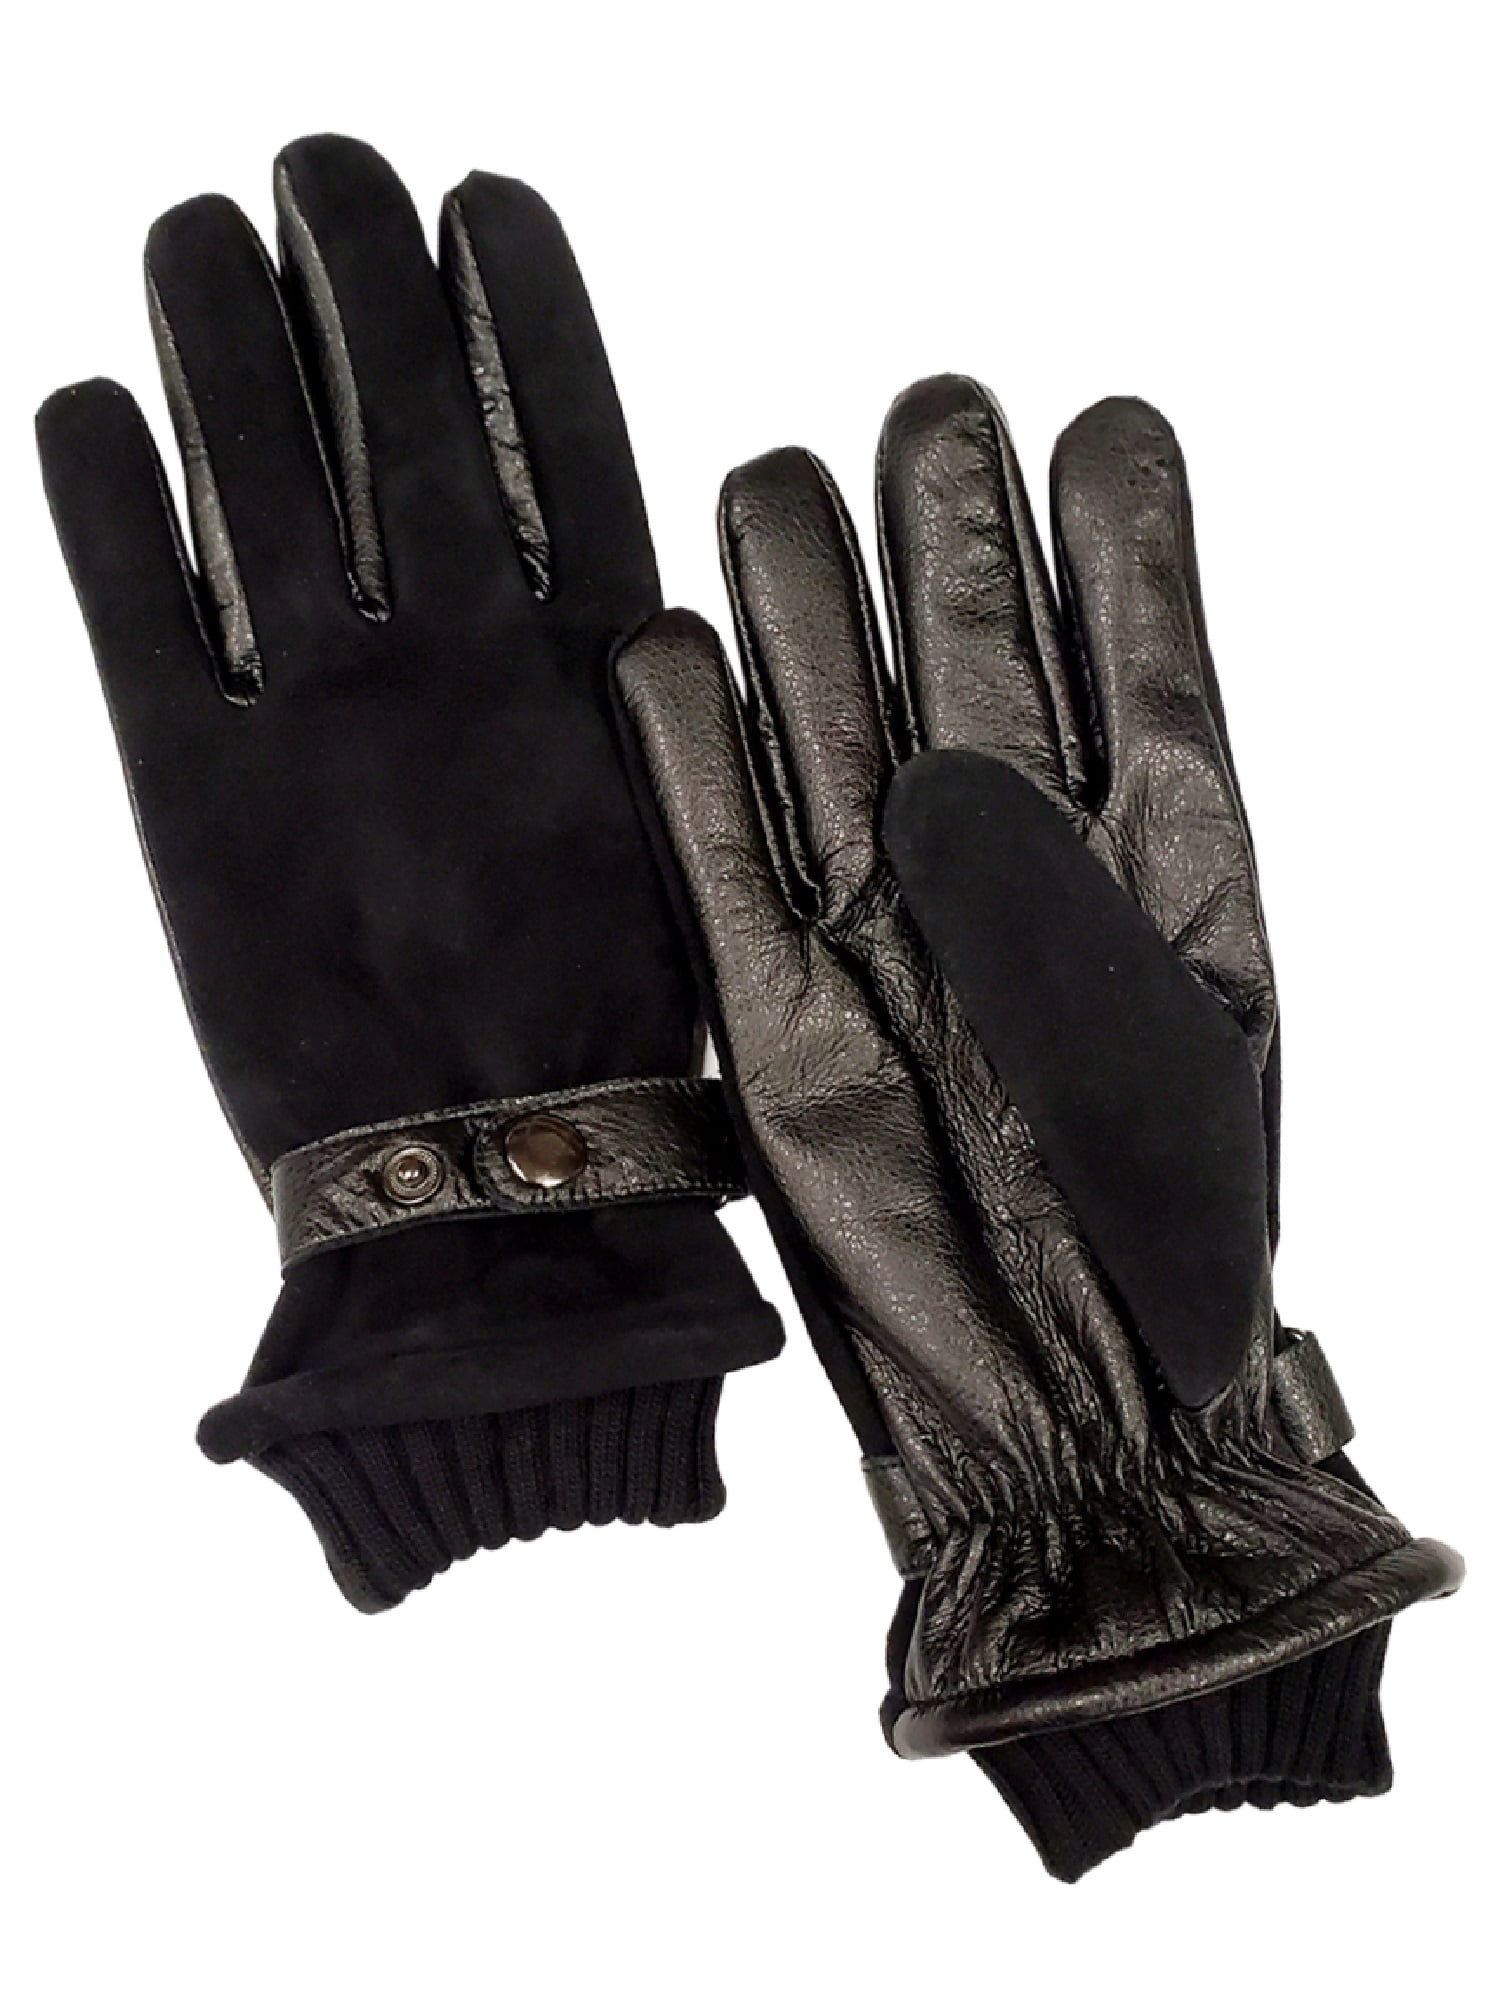 Mens Luxury 100% Suede Leather Winter Warm & Cosy Lined Gloves High Quality 